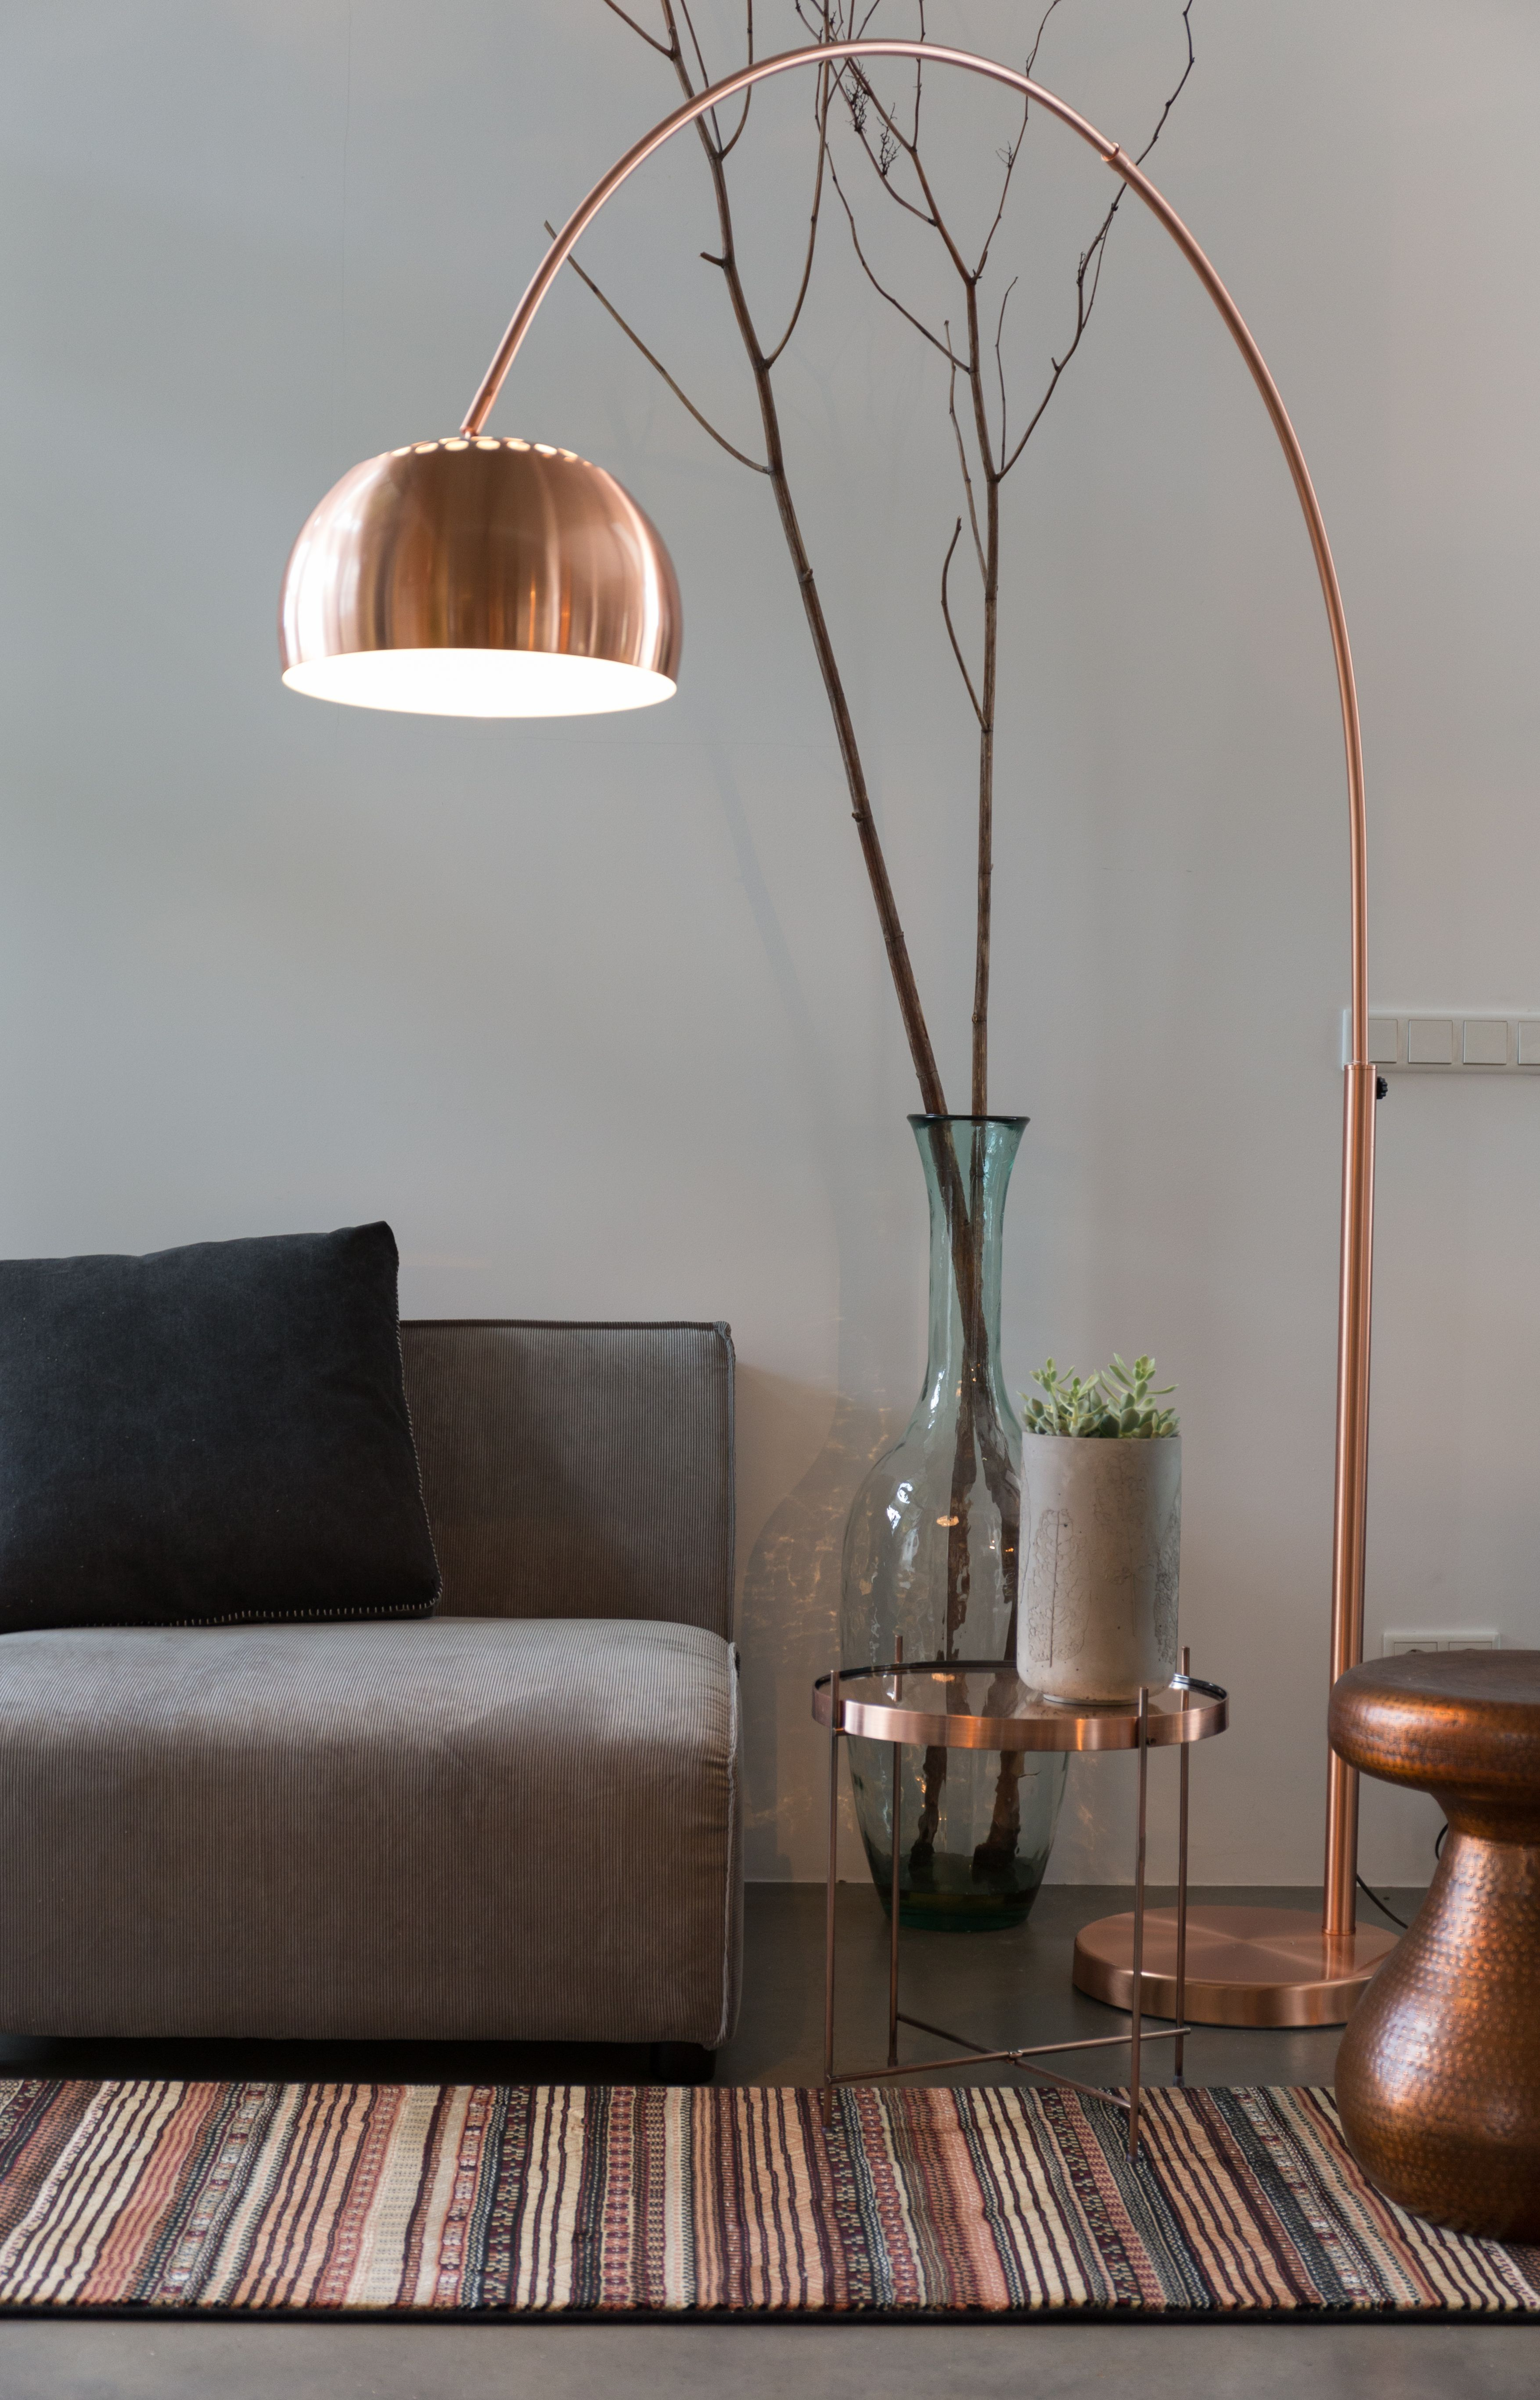 23 Ways To Decorate With Copper Modern Floor Lamps Arc throughout sizing 3508 X 5466